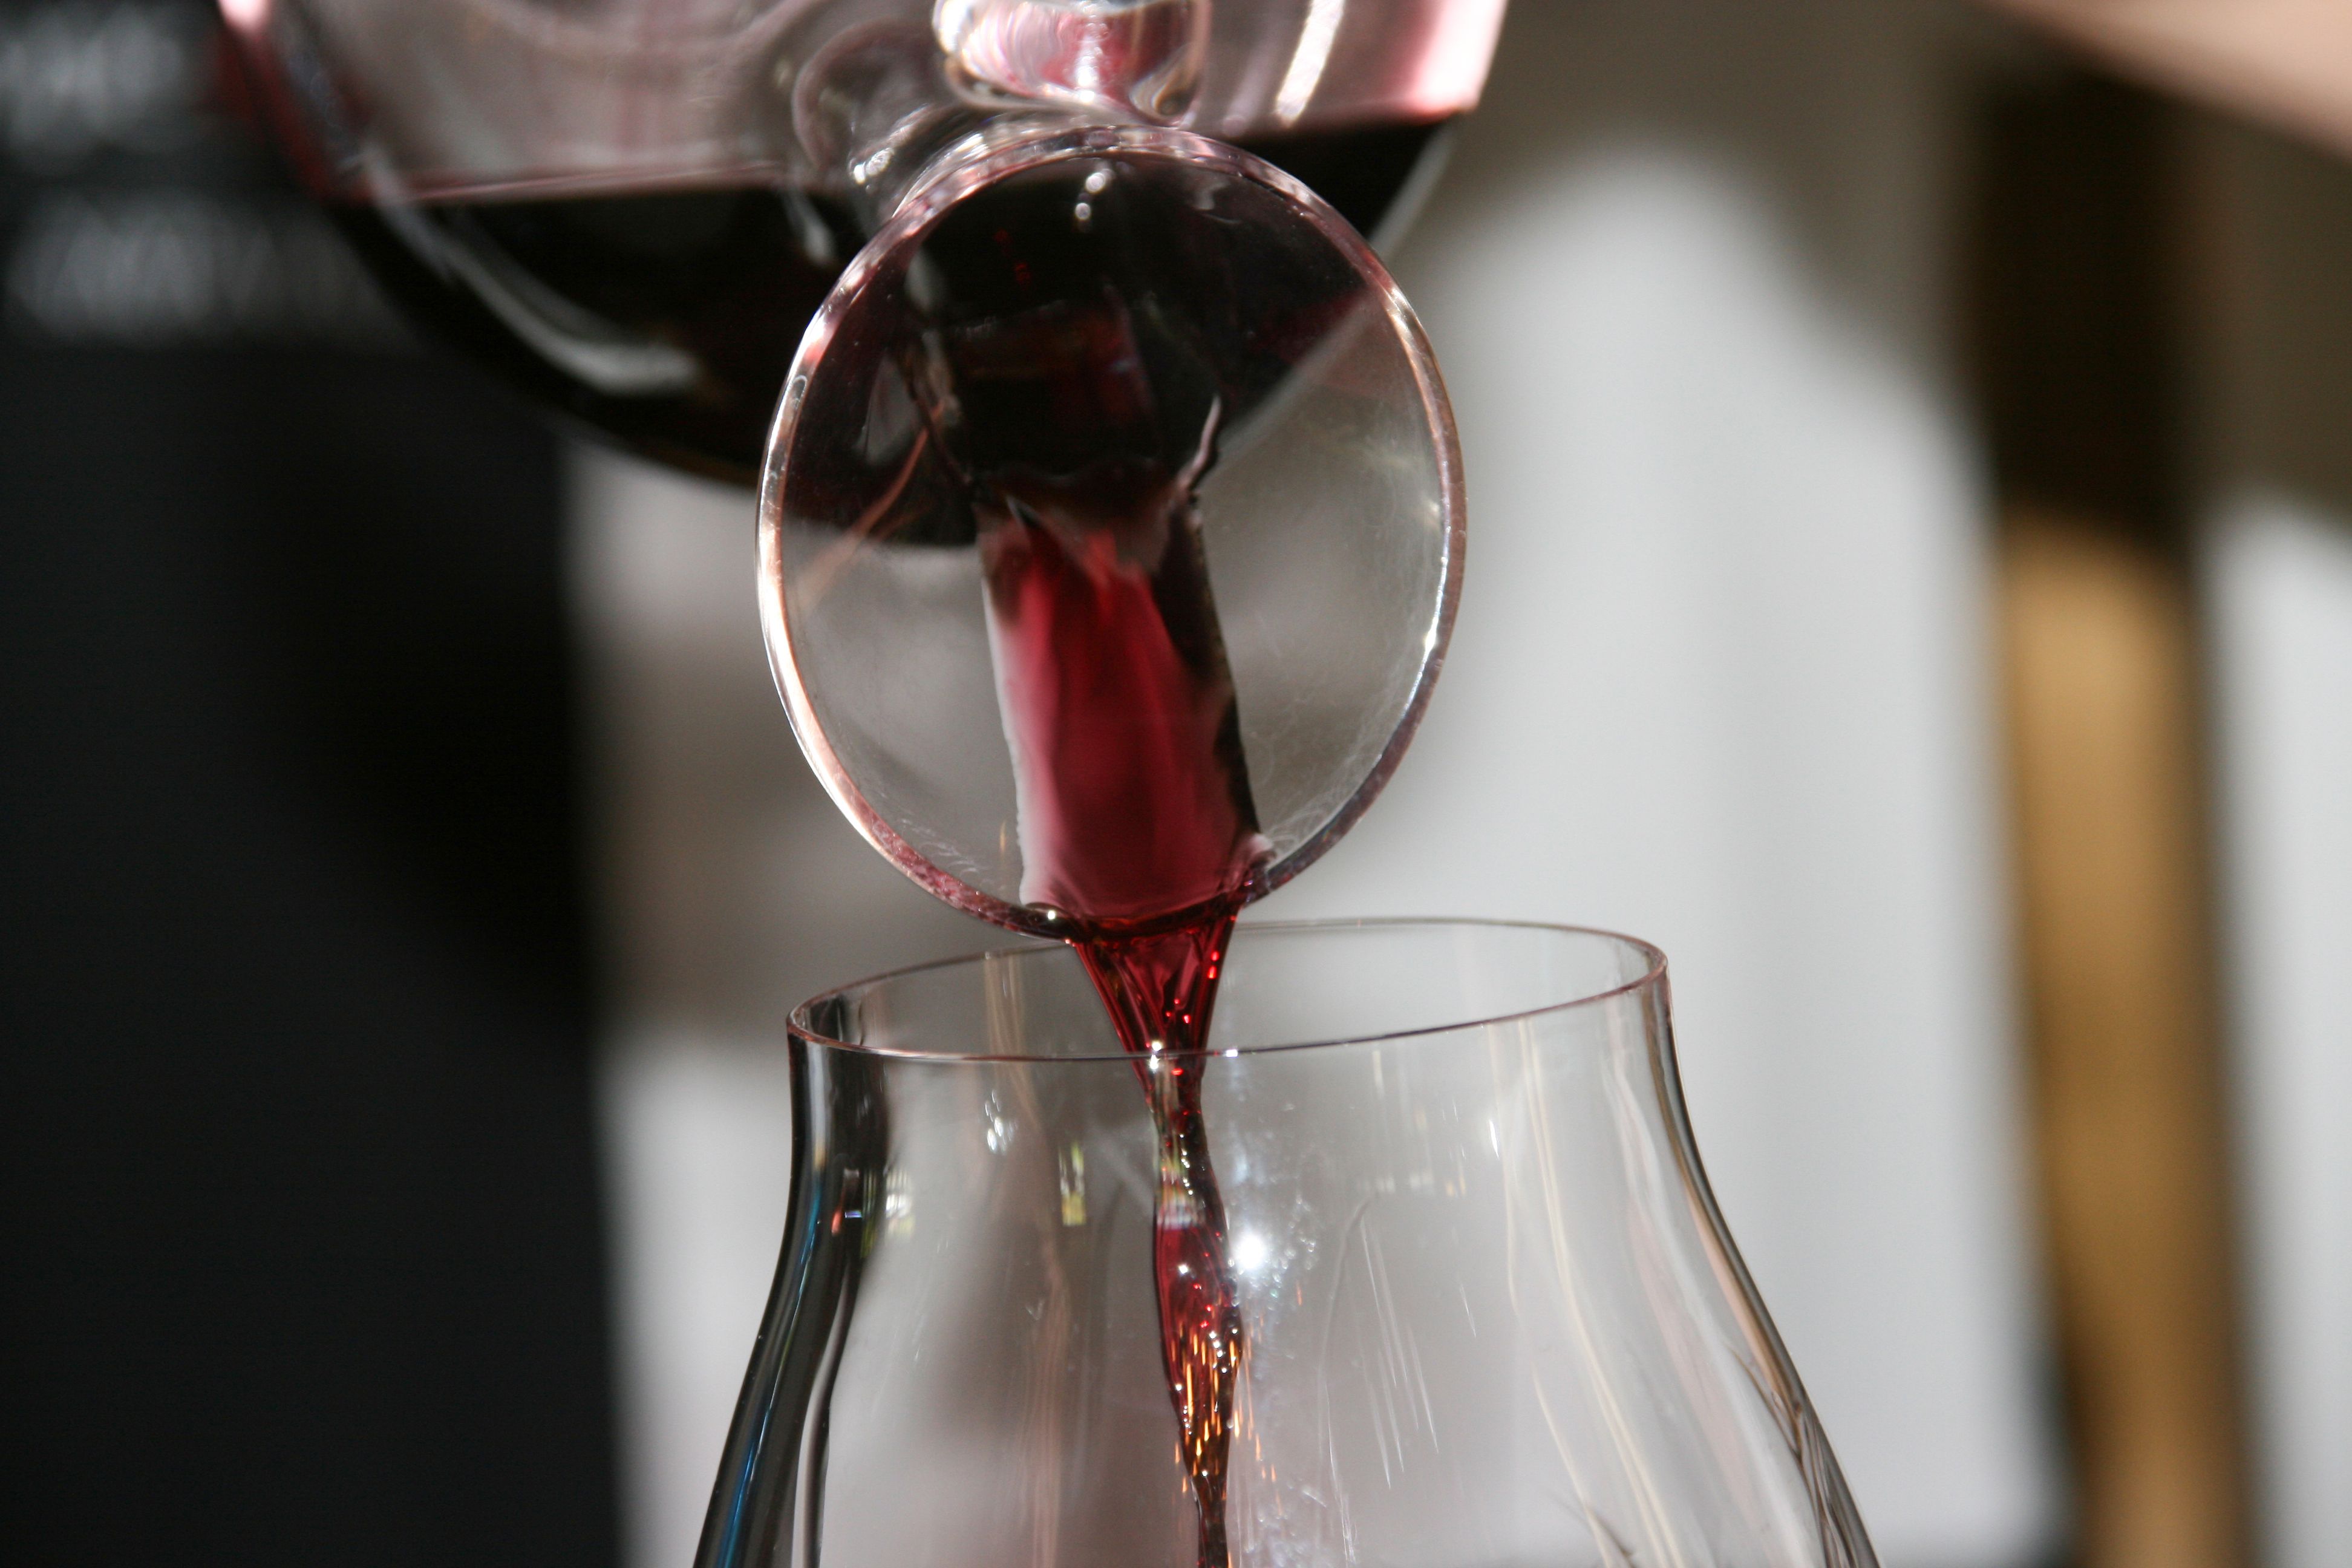 https://hips.hearstapps.com/hmg-prod/images/red-wine-pouring-from-a-decanter-to-a-wine-glass-royalty-free-image-1568313635.jpg